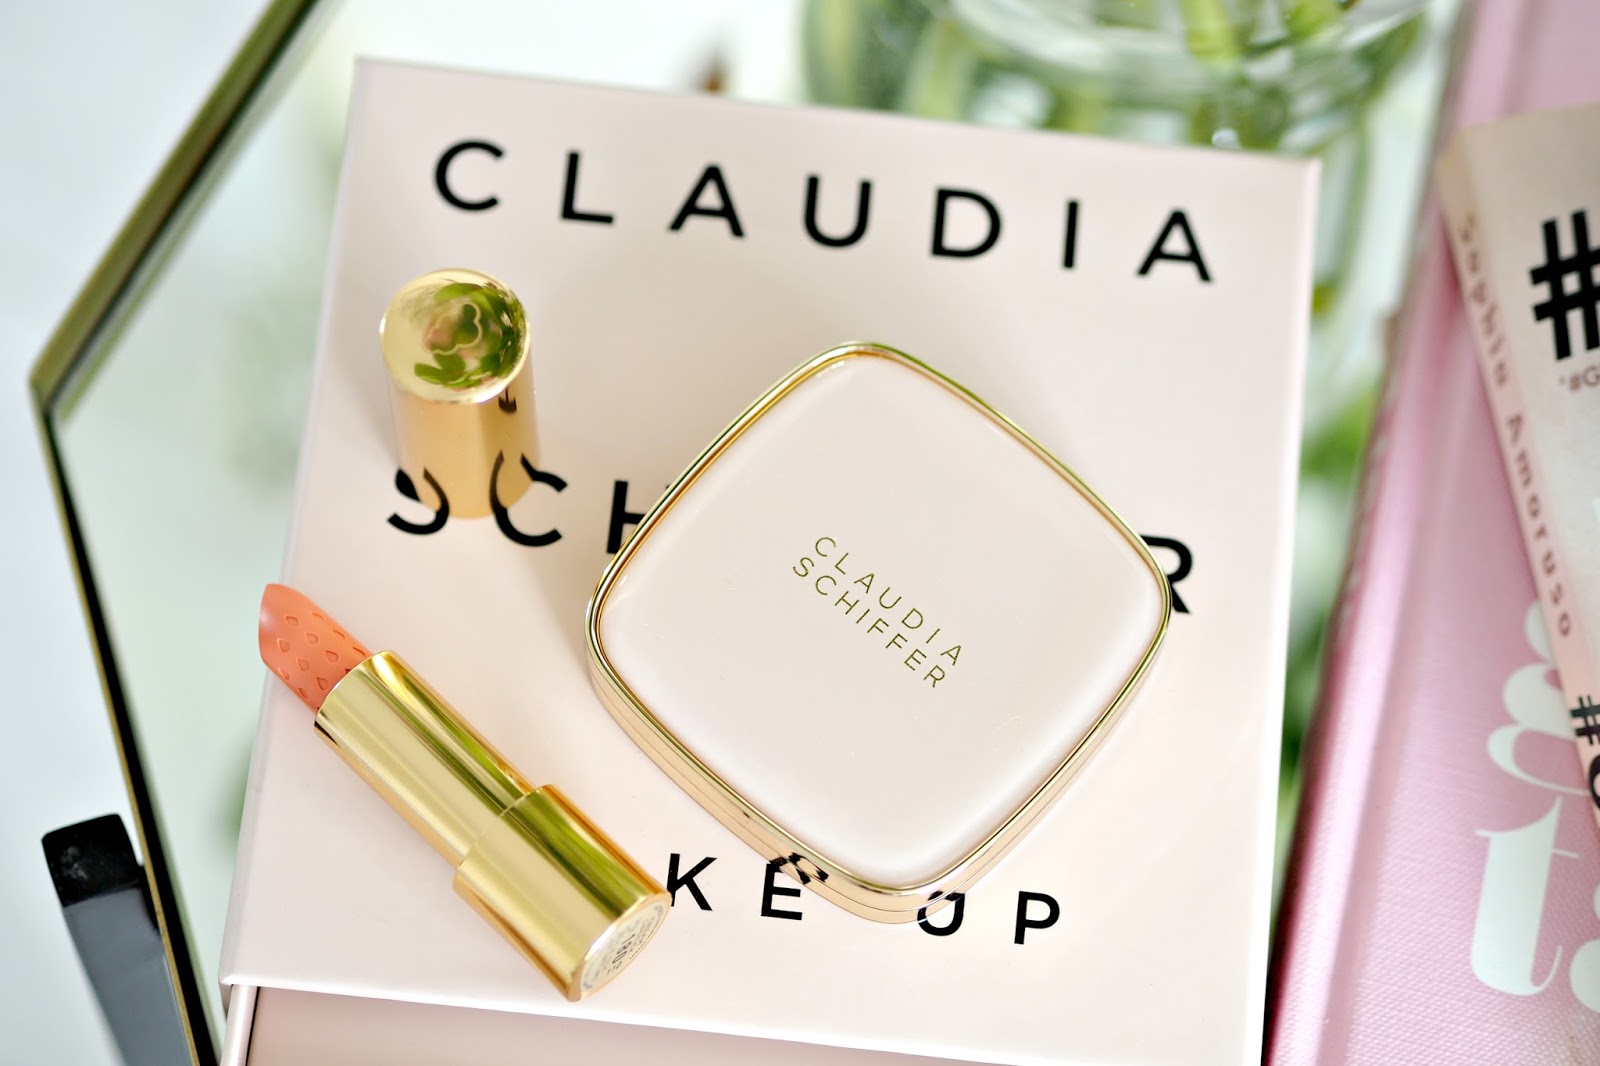 Claudia Schiffer Compact Blusher shade 22 - Passionfruit 